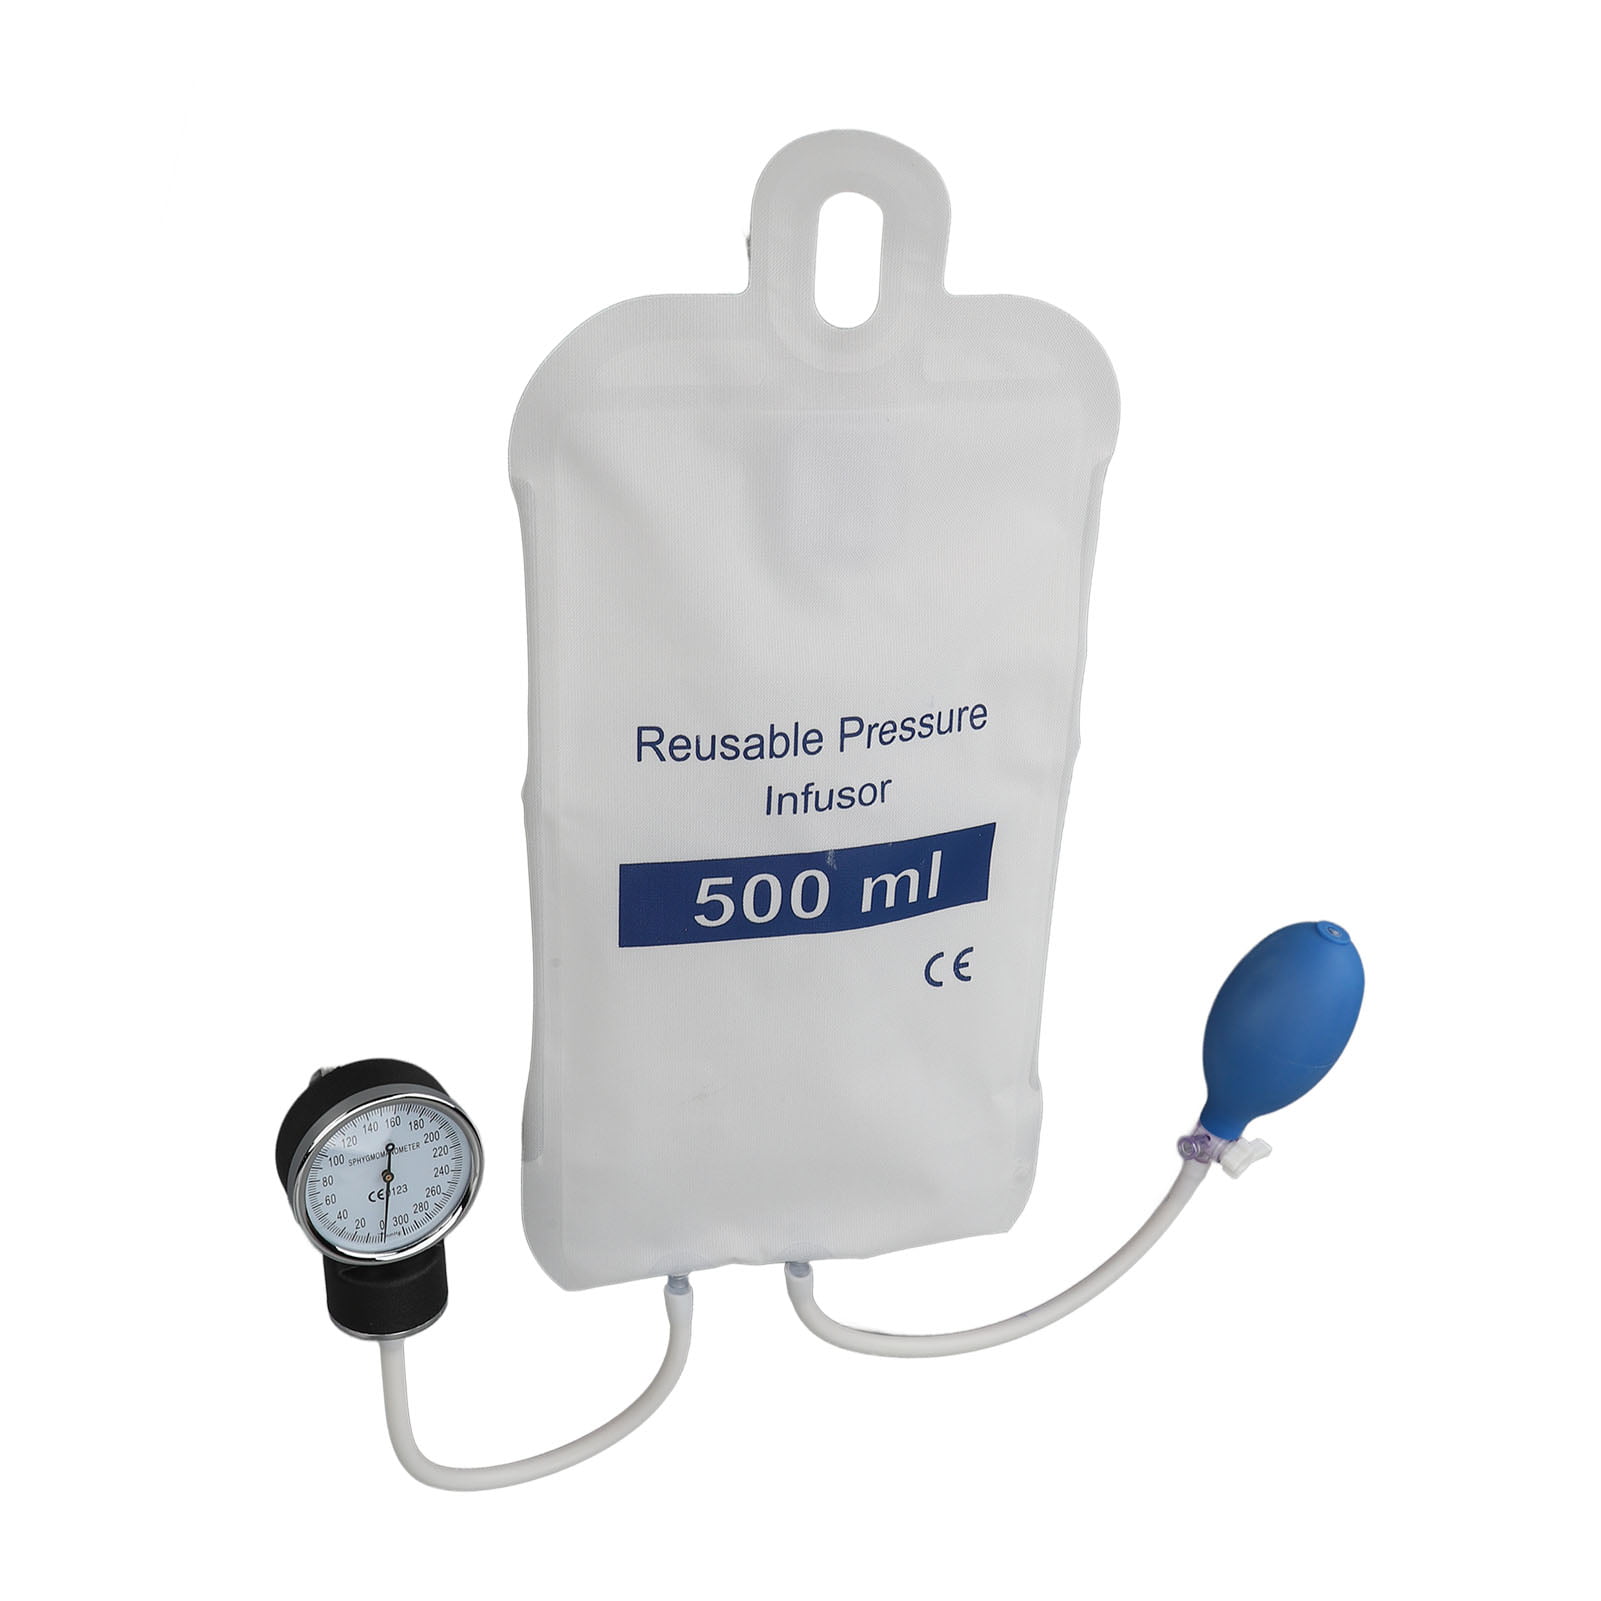 Pressure Infusion Bag Icu Monitoring Fluid Quick Infusion With Indicator  Gauge Head For Rapid Blood And Fluids Infusion 1000ml | Fruugo NO